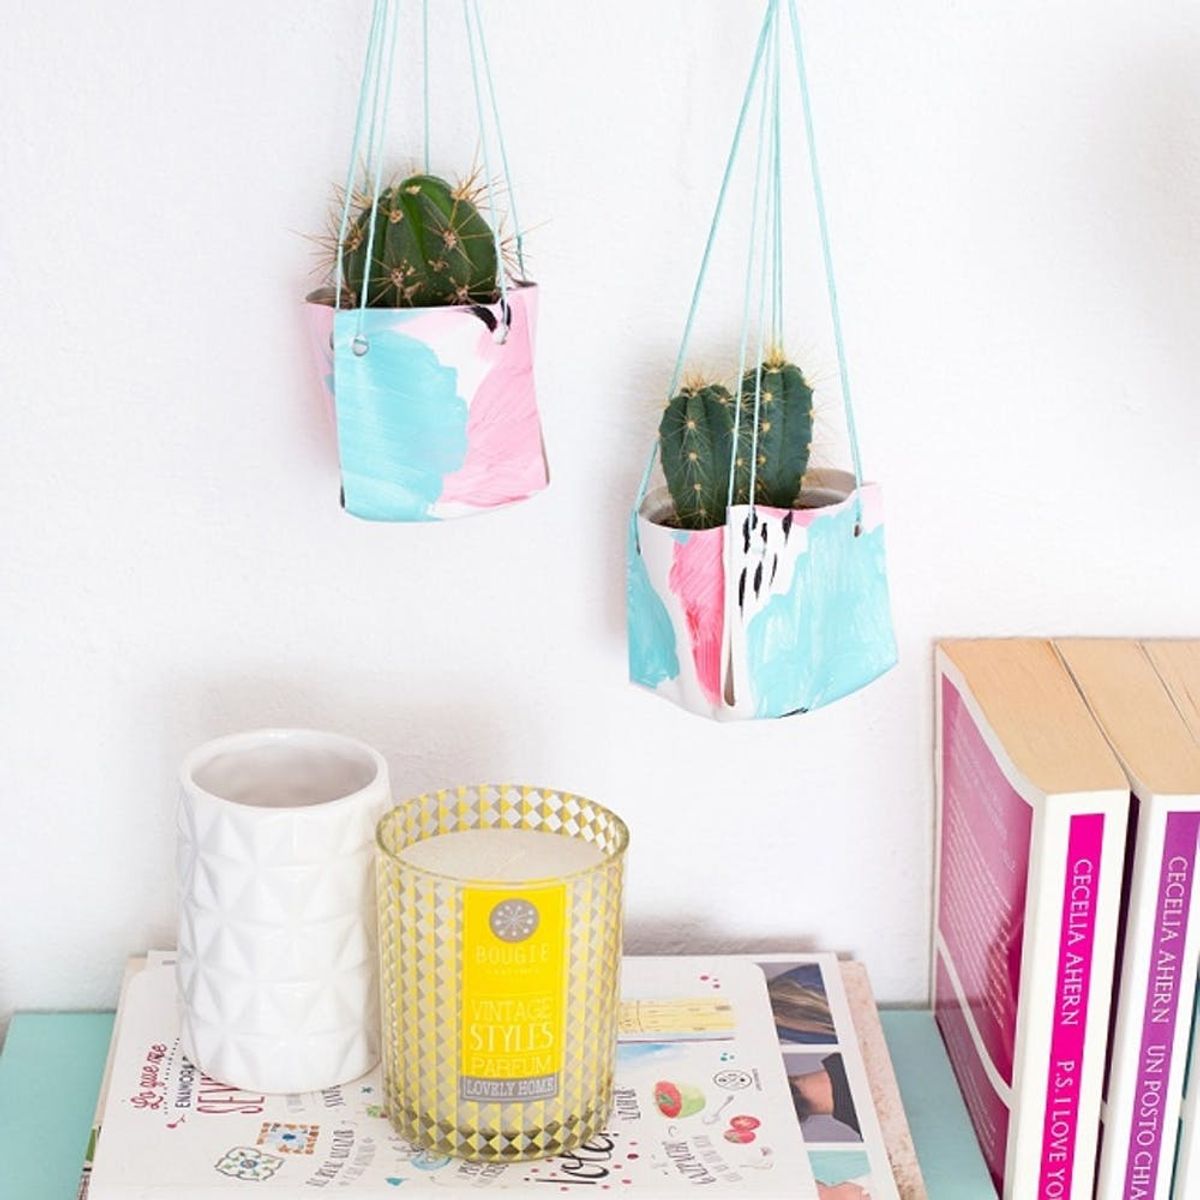 DIY These Hanging Leather Planters to Spruce Up Your Home